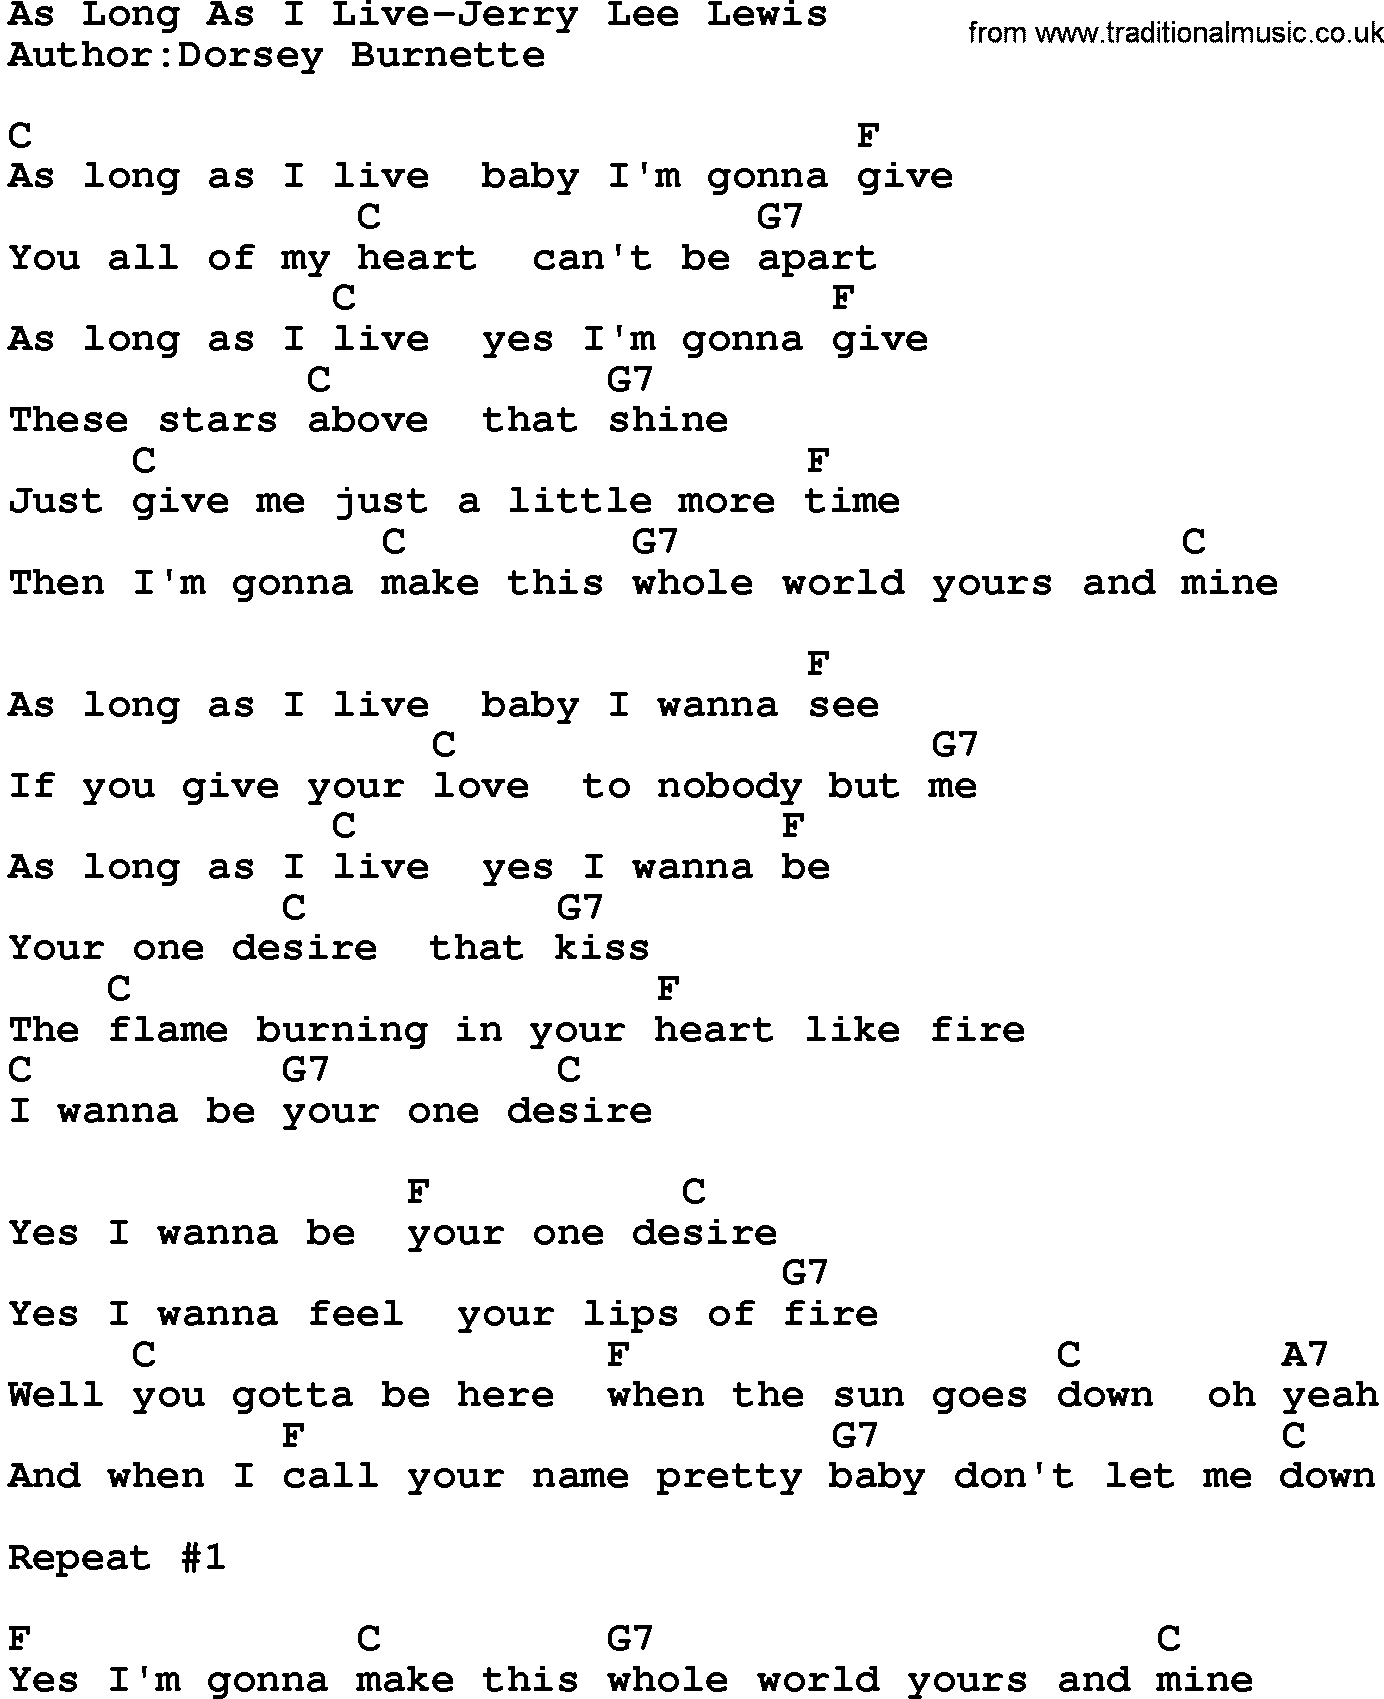 Country music song: As Long As I Live-Jerry Lee Lewis lyrics and chords